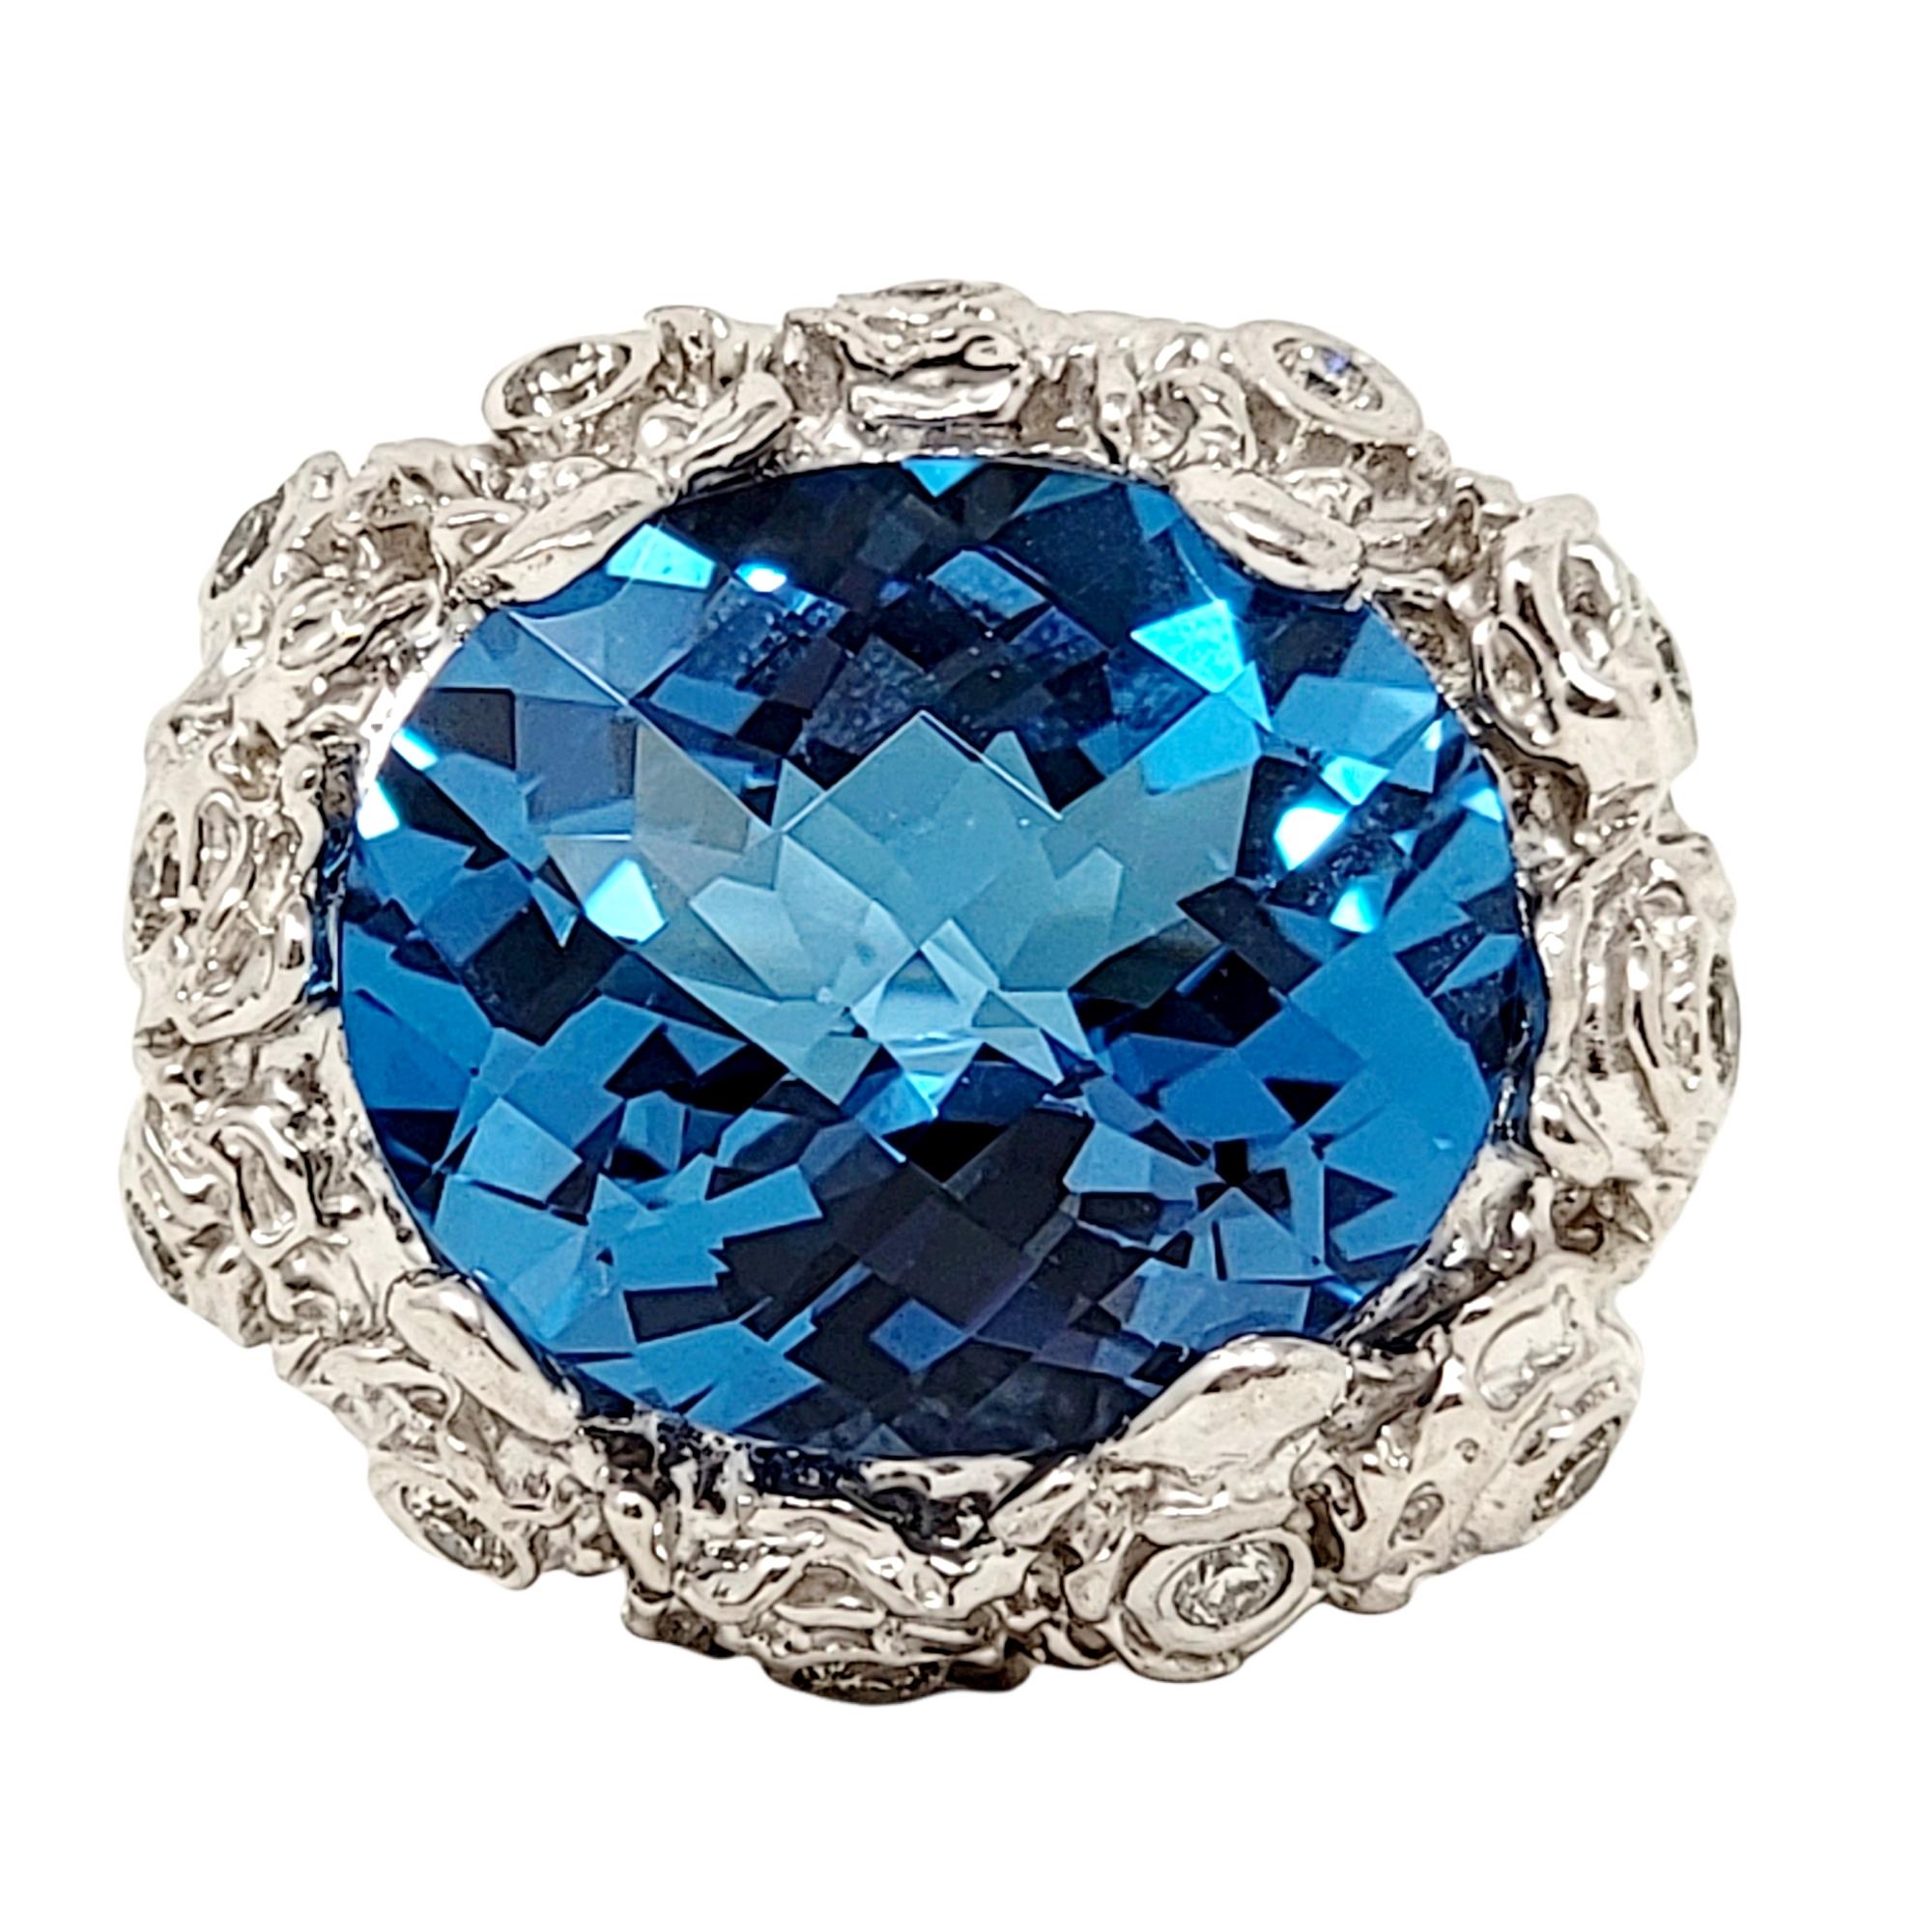 Ring size: 5

Magnificent bright blue topaz ring with diamond accents. You won't be able to take your eyes off the striking blue color paired with the icy white diamonds. Simply gorgeous!

Metal: 18K White Gold 
Ring size: 5
Weight: 11.08 grams
Blue